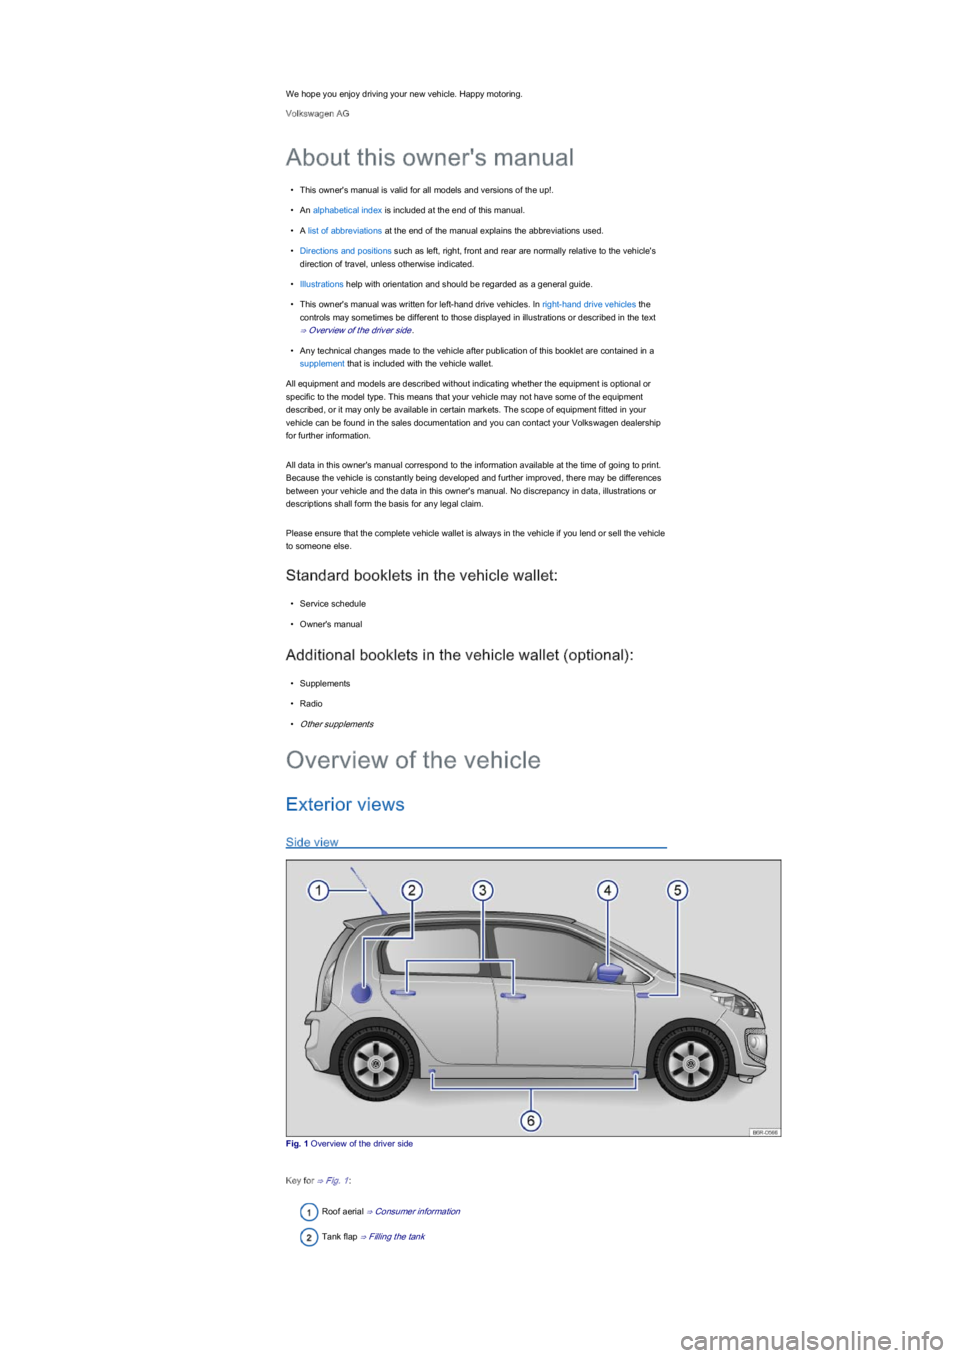 VOLKSWAGEN UP! 2021  Owner´s Manual We hope you enjoy driving your new vehicle. Happy motoring.
Volkswagen AG
•This owner's manual is valid for all models and versions of the up!.
•An alphabetical index is included at the end of